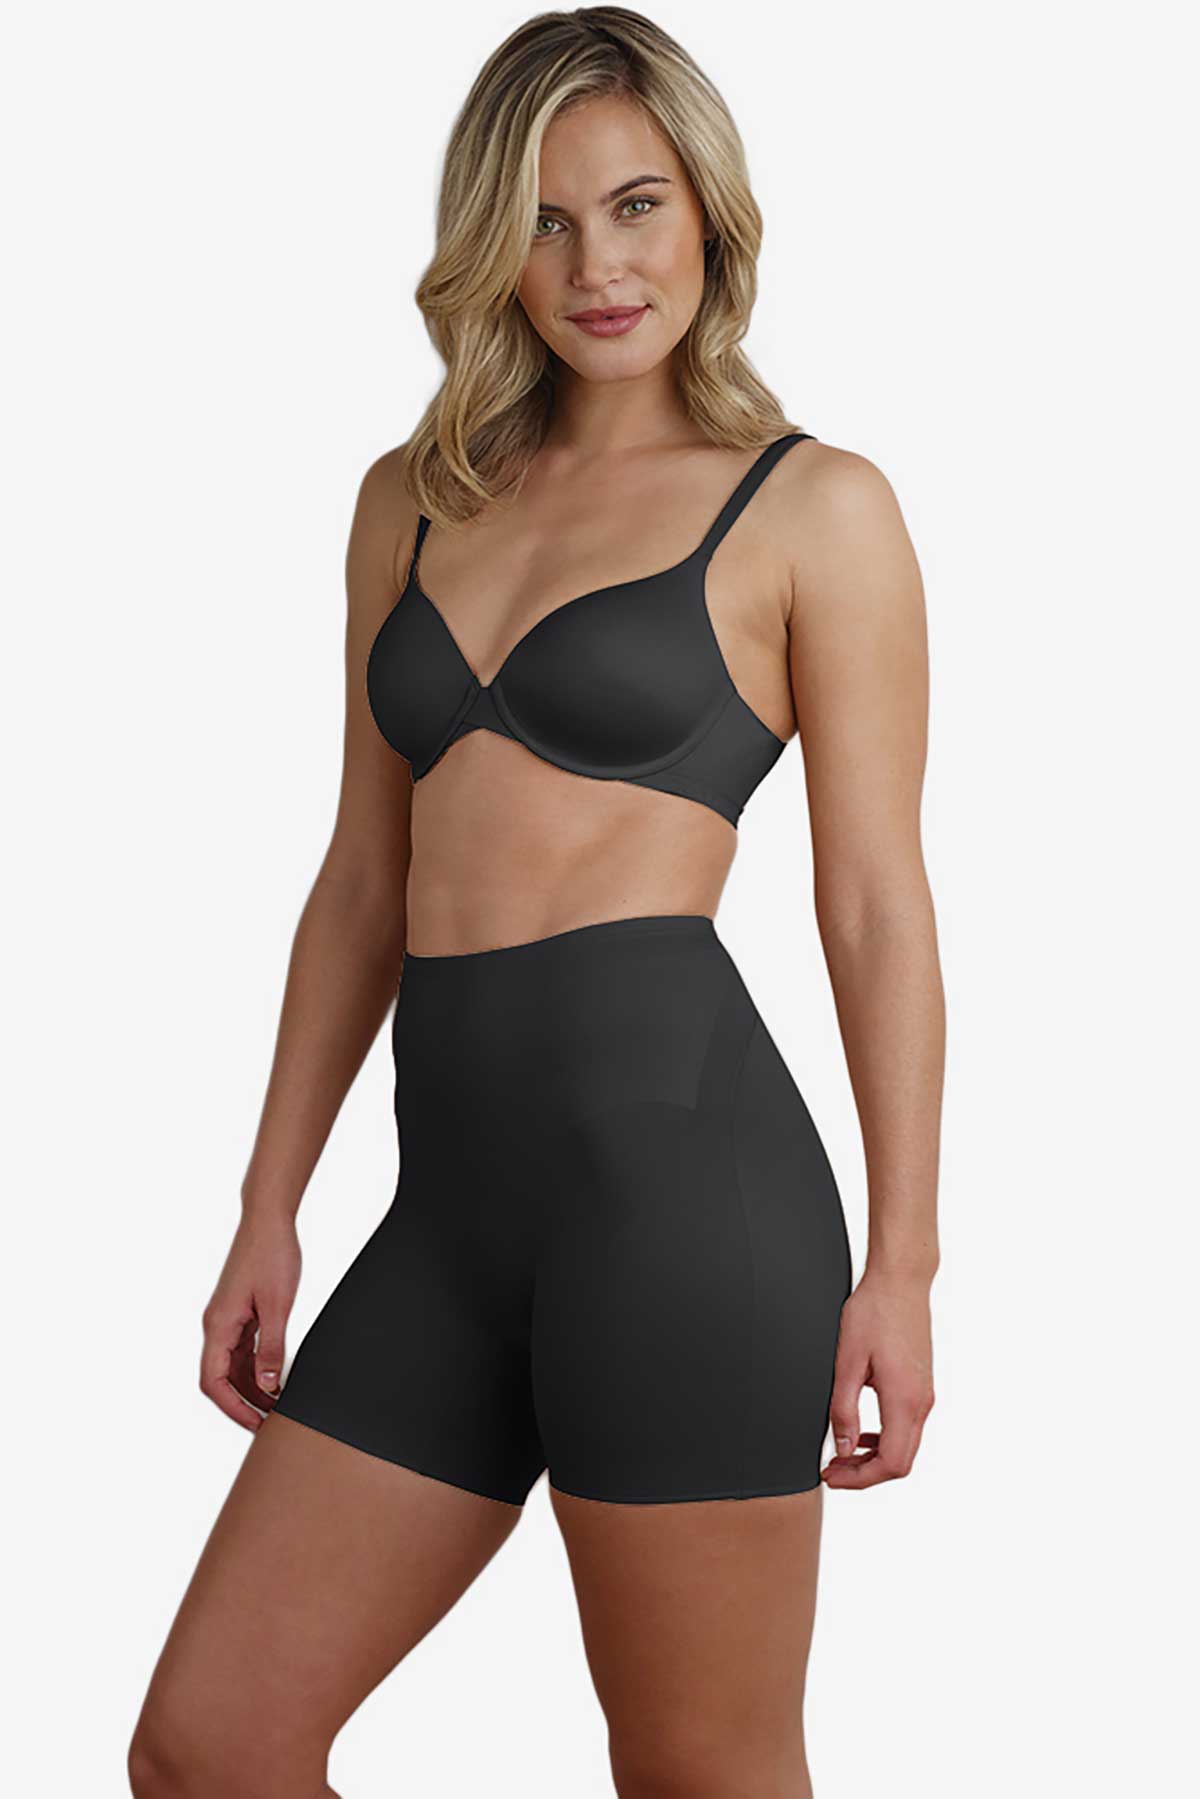 Miraclesuit Flexible Fit® Firm Control High-Waist Thigh Slimmer